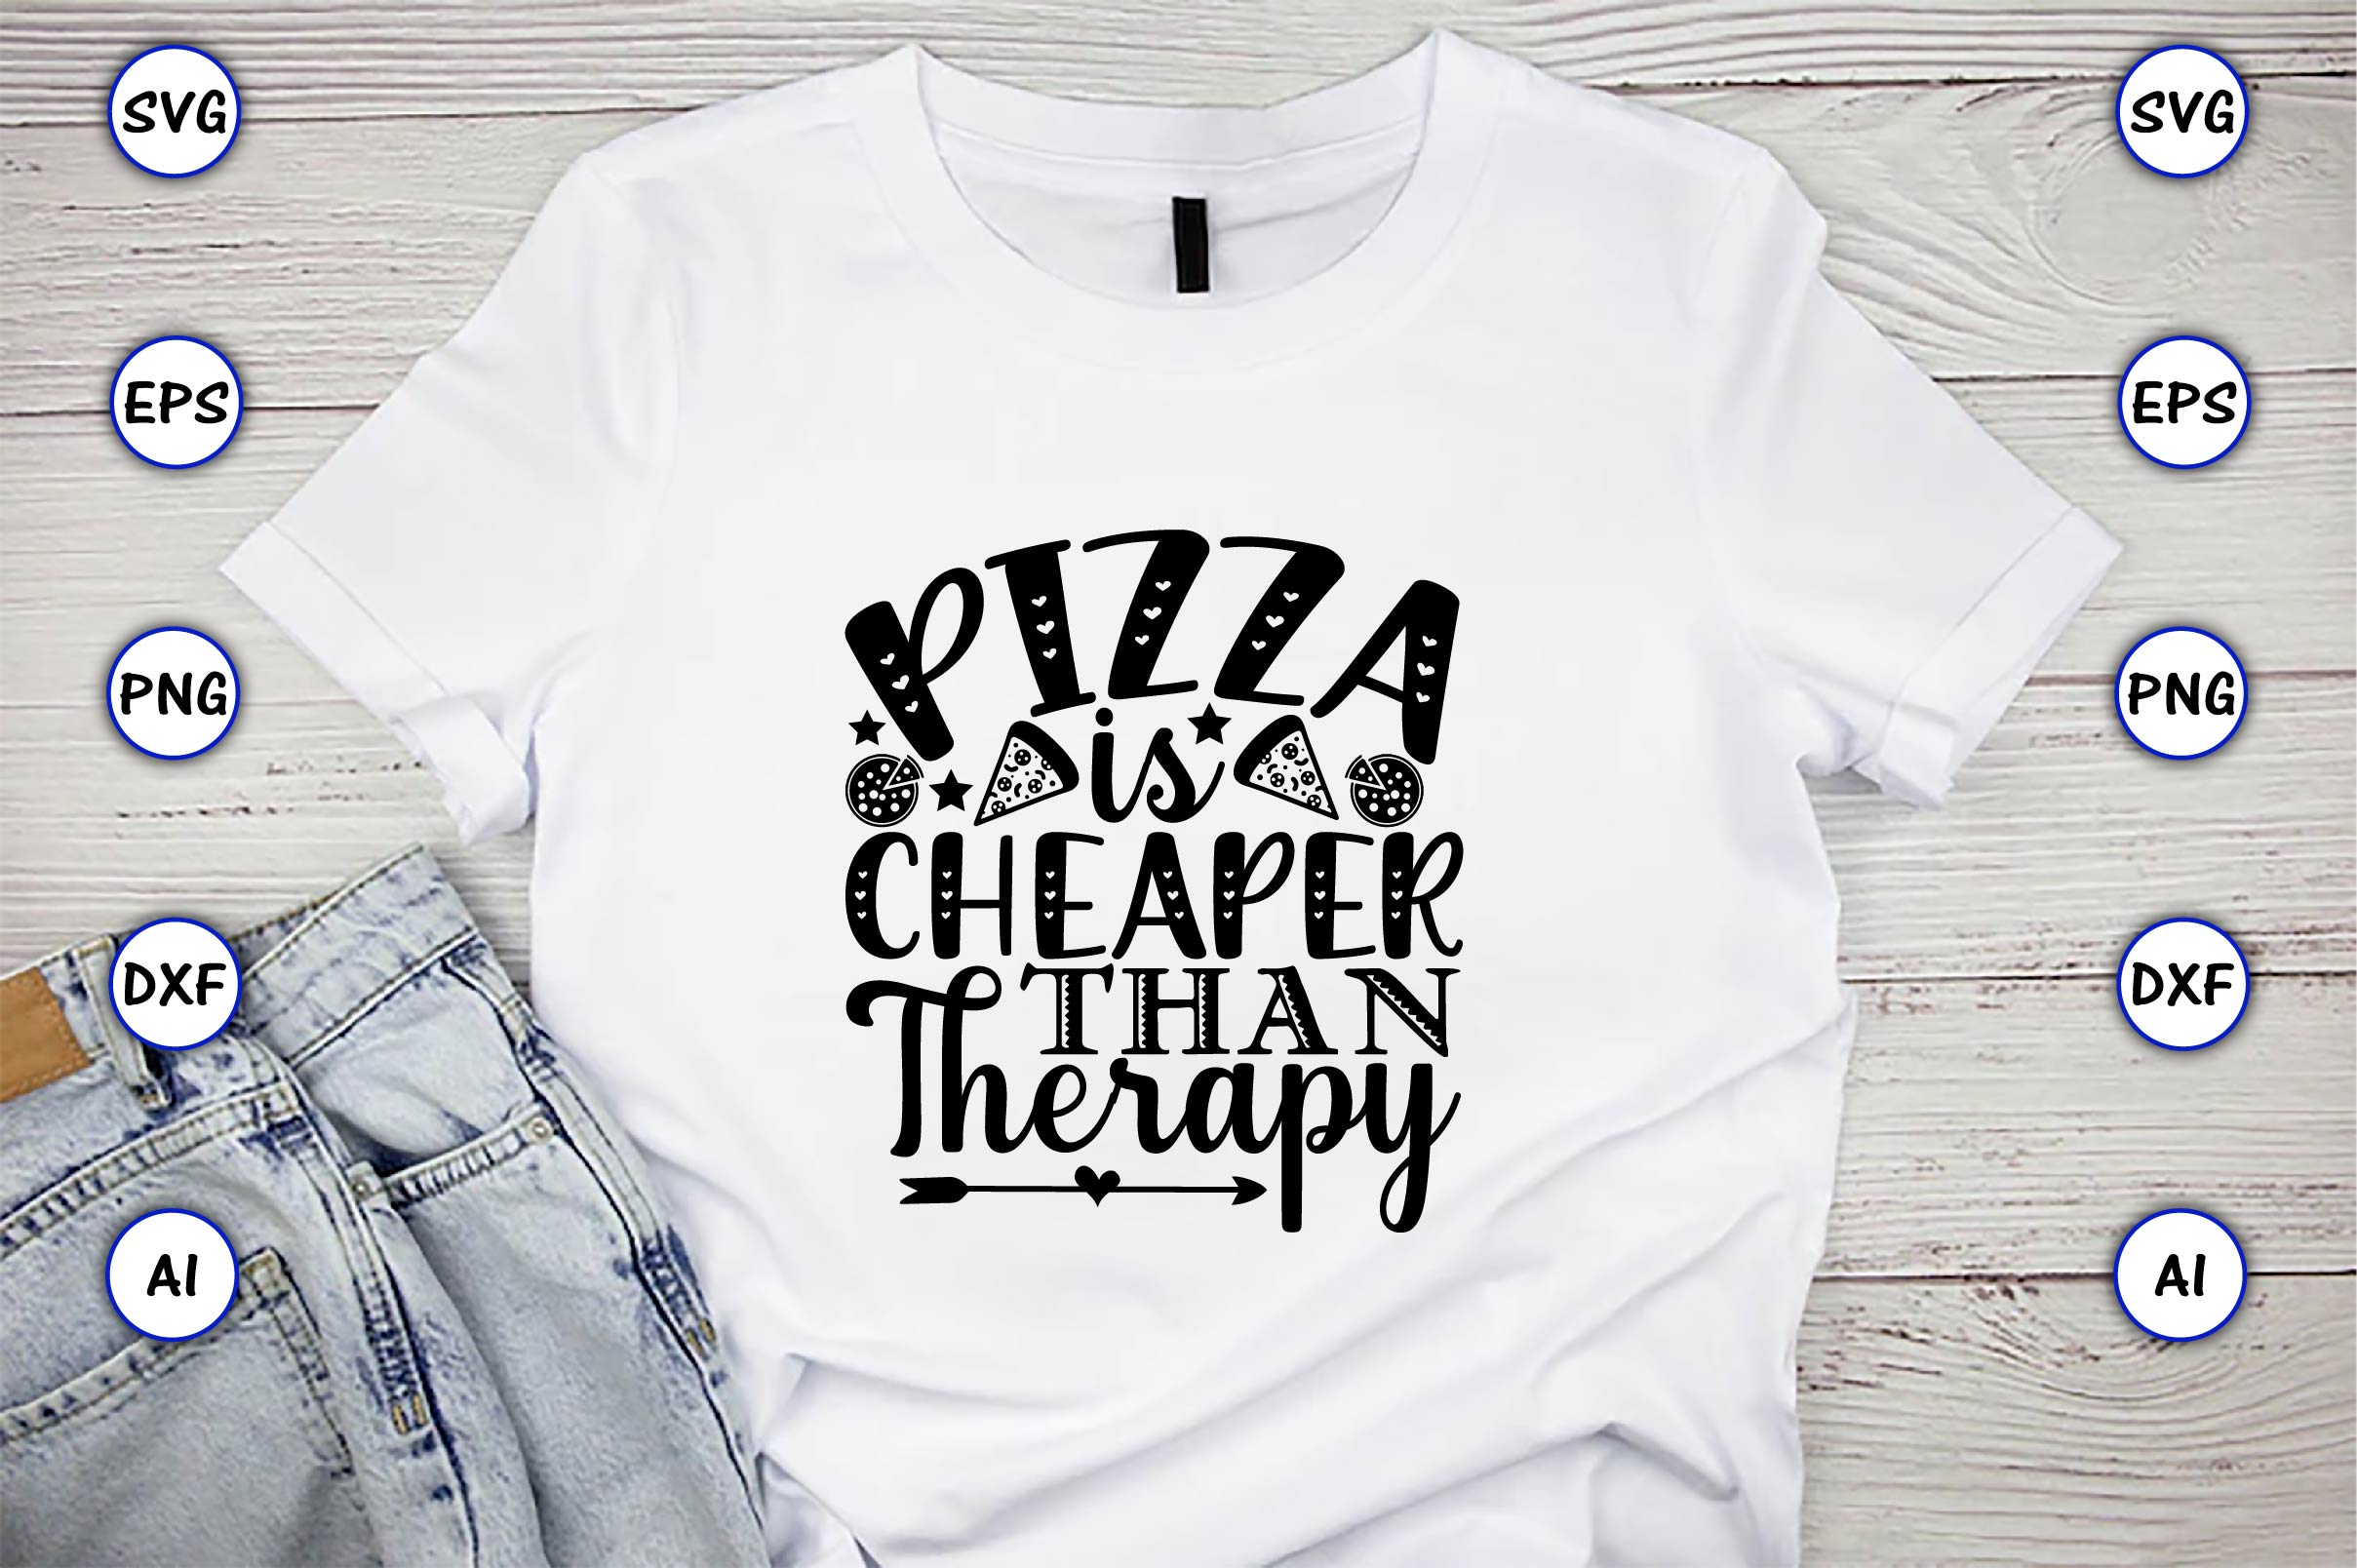 Image of a white t-shirt with an elegant inscription Pizza is cheaper than therapy.